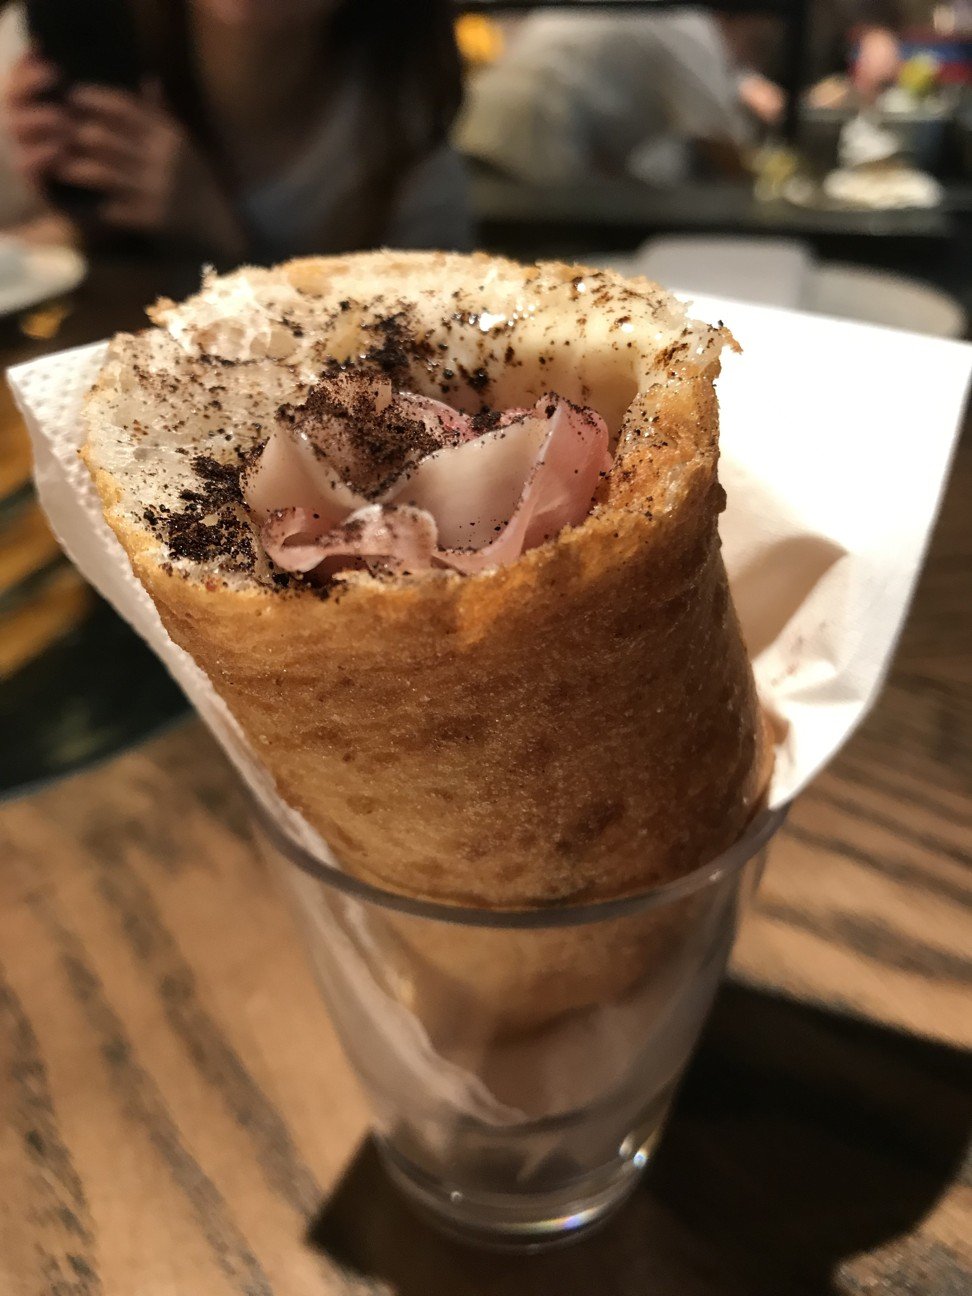 Pineapple pizza cone by Franco Pepe at Kytaly. Photo: Bernice Chan